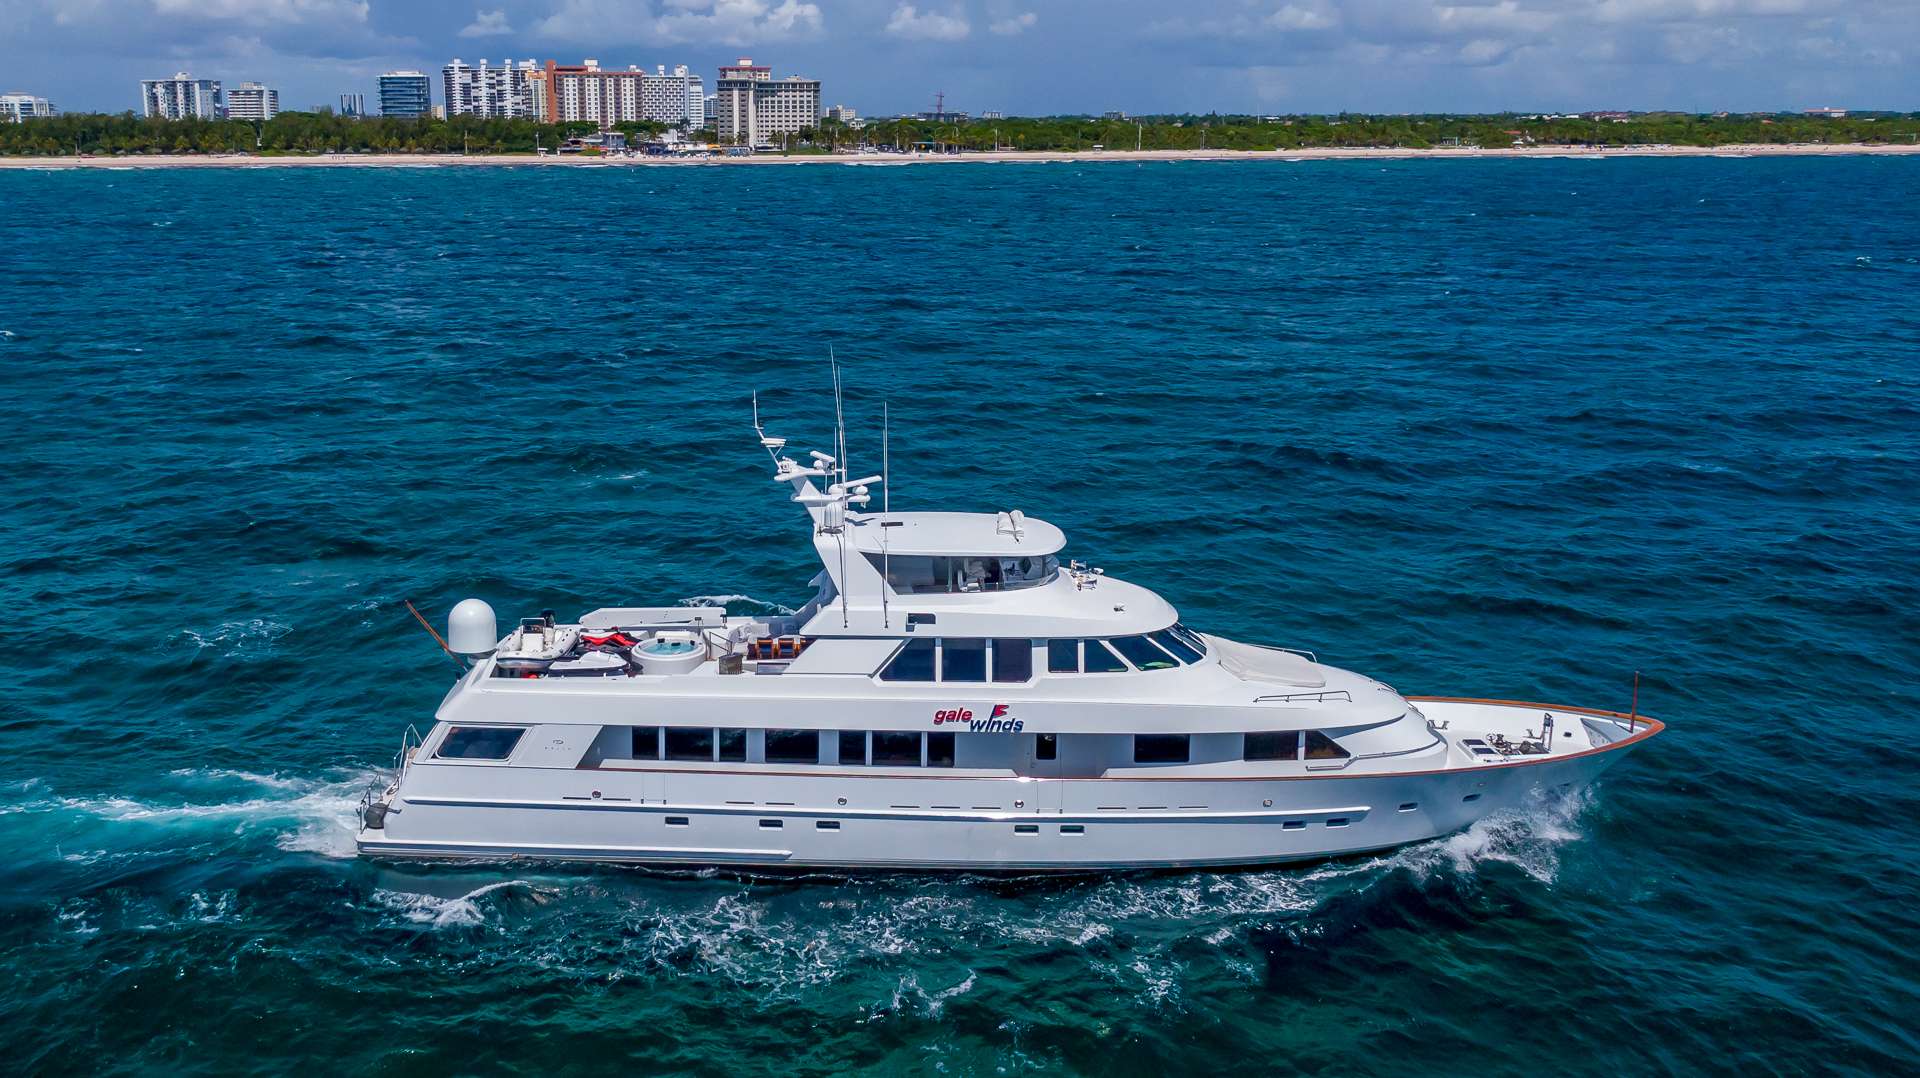 GALE WINDS Yacht Charter - Ritzy Charters